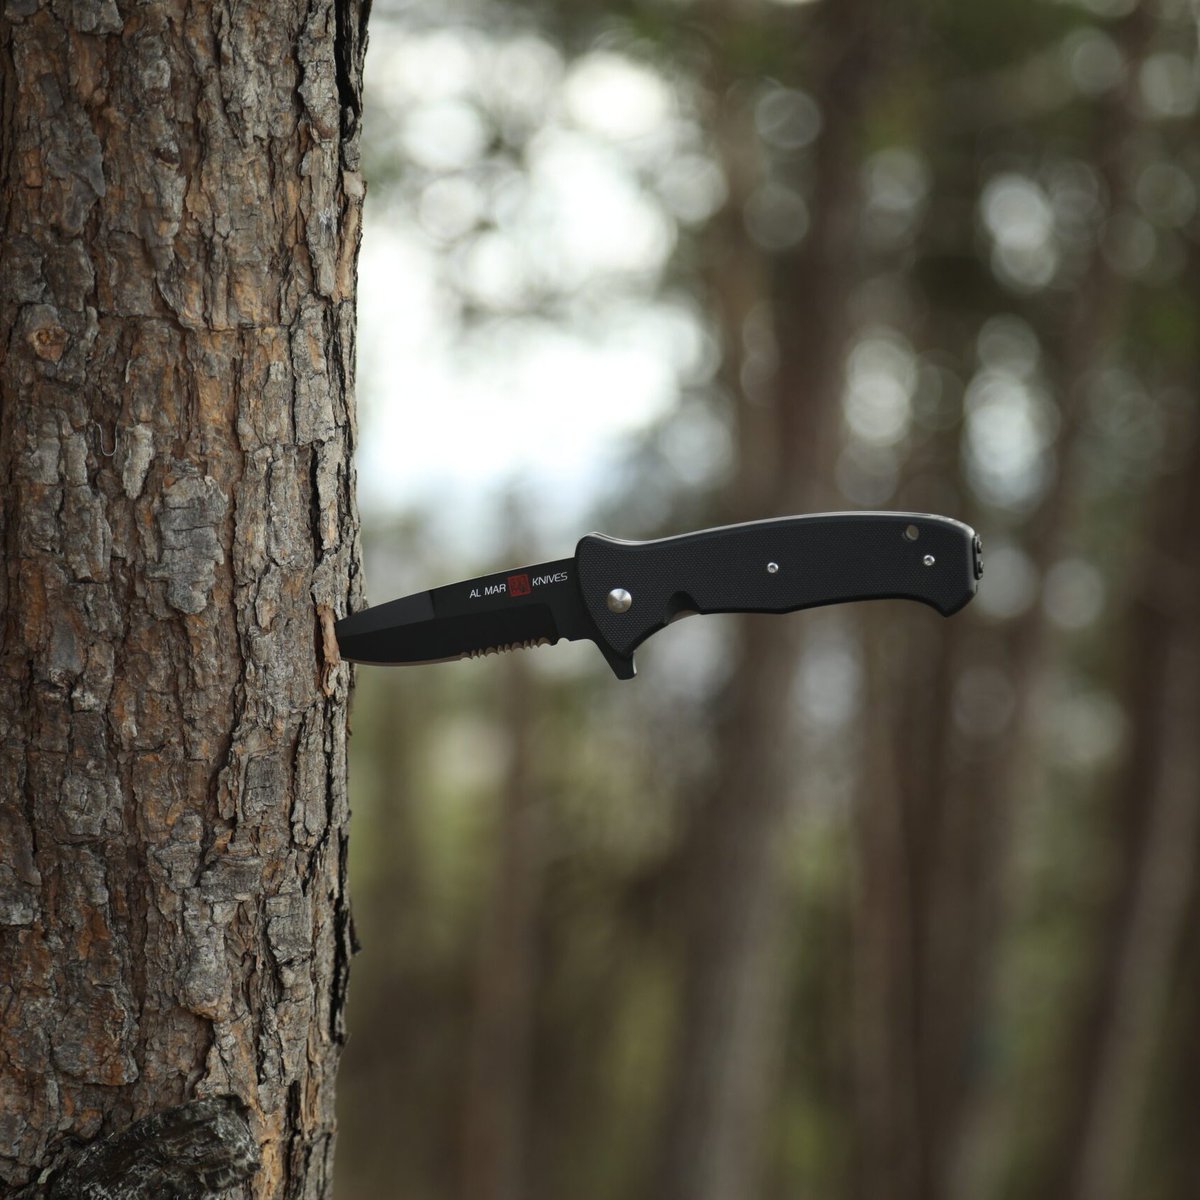 When you need a knife that won't let you down, look no further than Al Mar Knives. #knife #knives #knifelife #everydaycarry #handmade #knifecut #knifemaker #knifemaking #blade 

bit.ly/41dfEeb